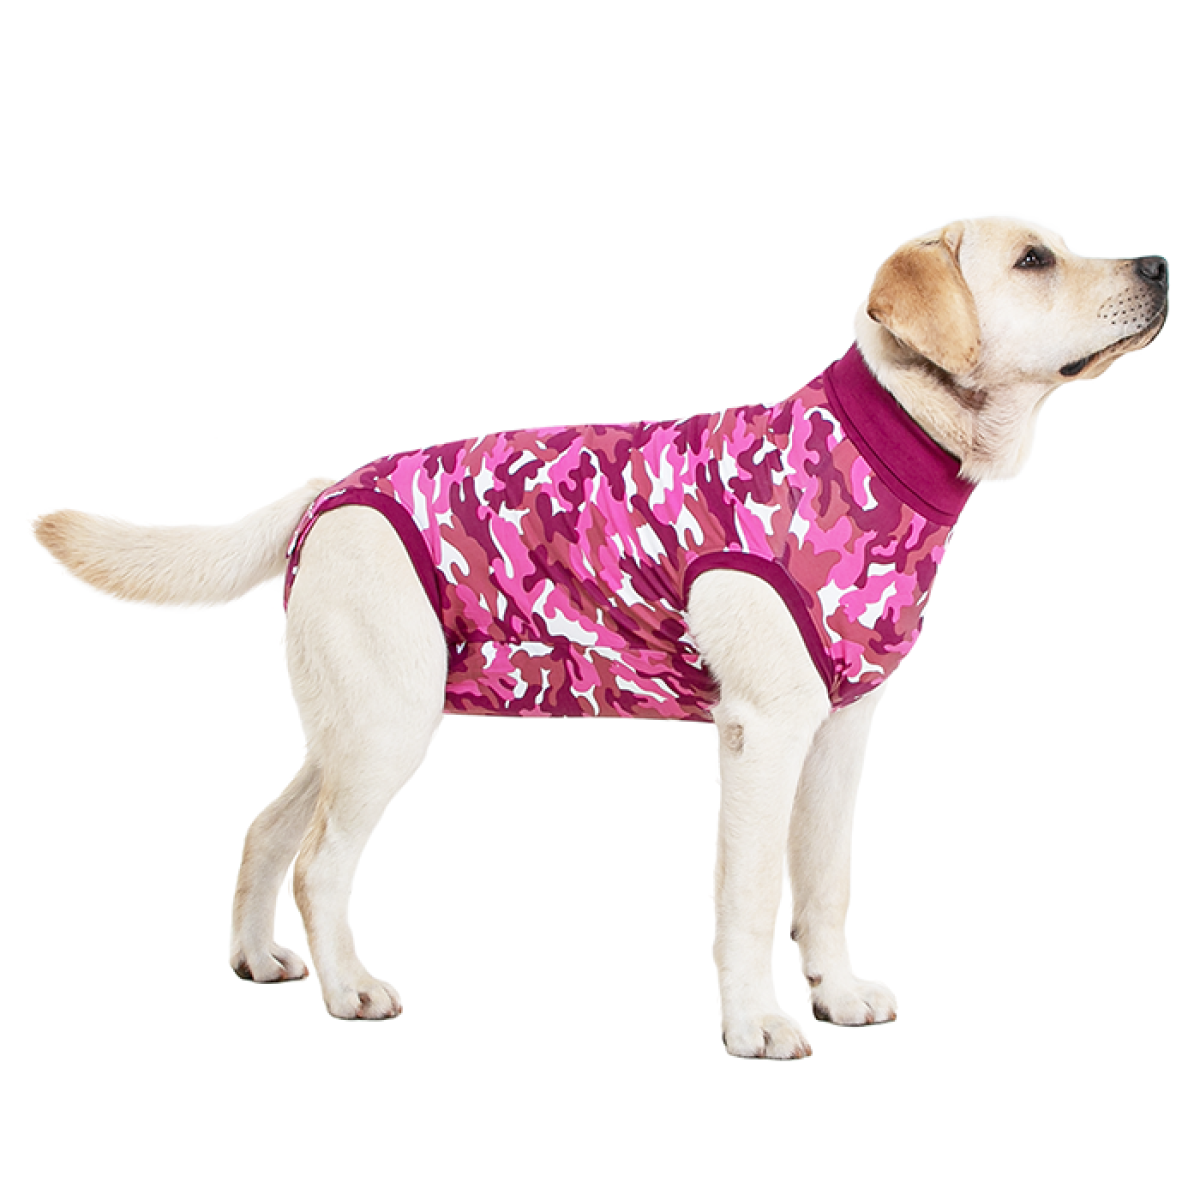 SAWMONG Recovery Suit for Dog Pet Recovery Suit After Surgery Recovery Shirt Surgical Snugly Suit Dog Onesie for Male Female Dog Bodysuit Substitute E-Collar&Cone 